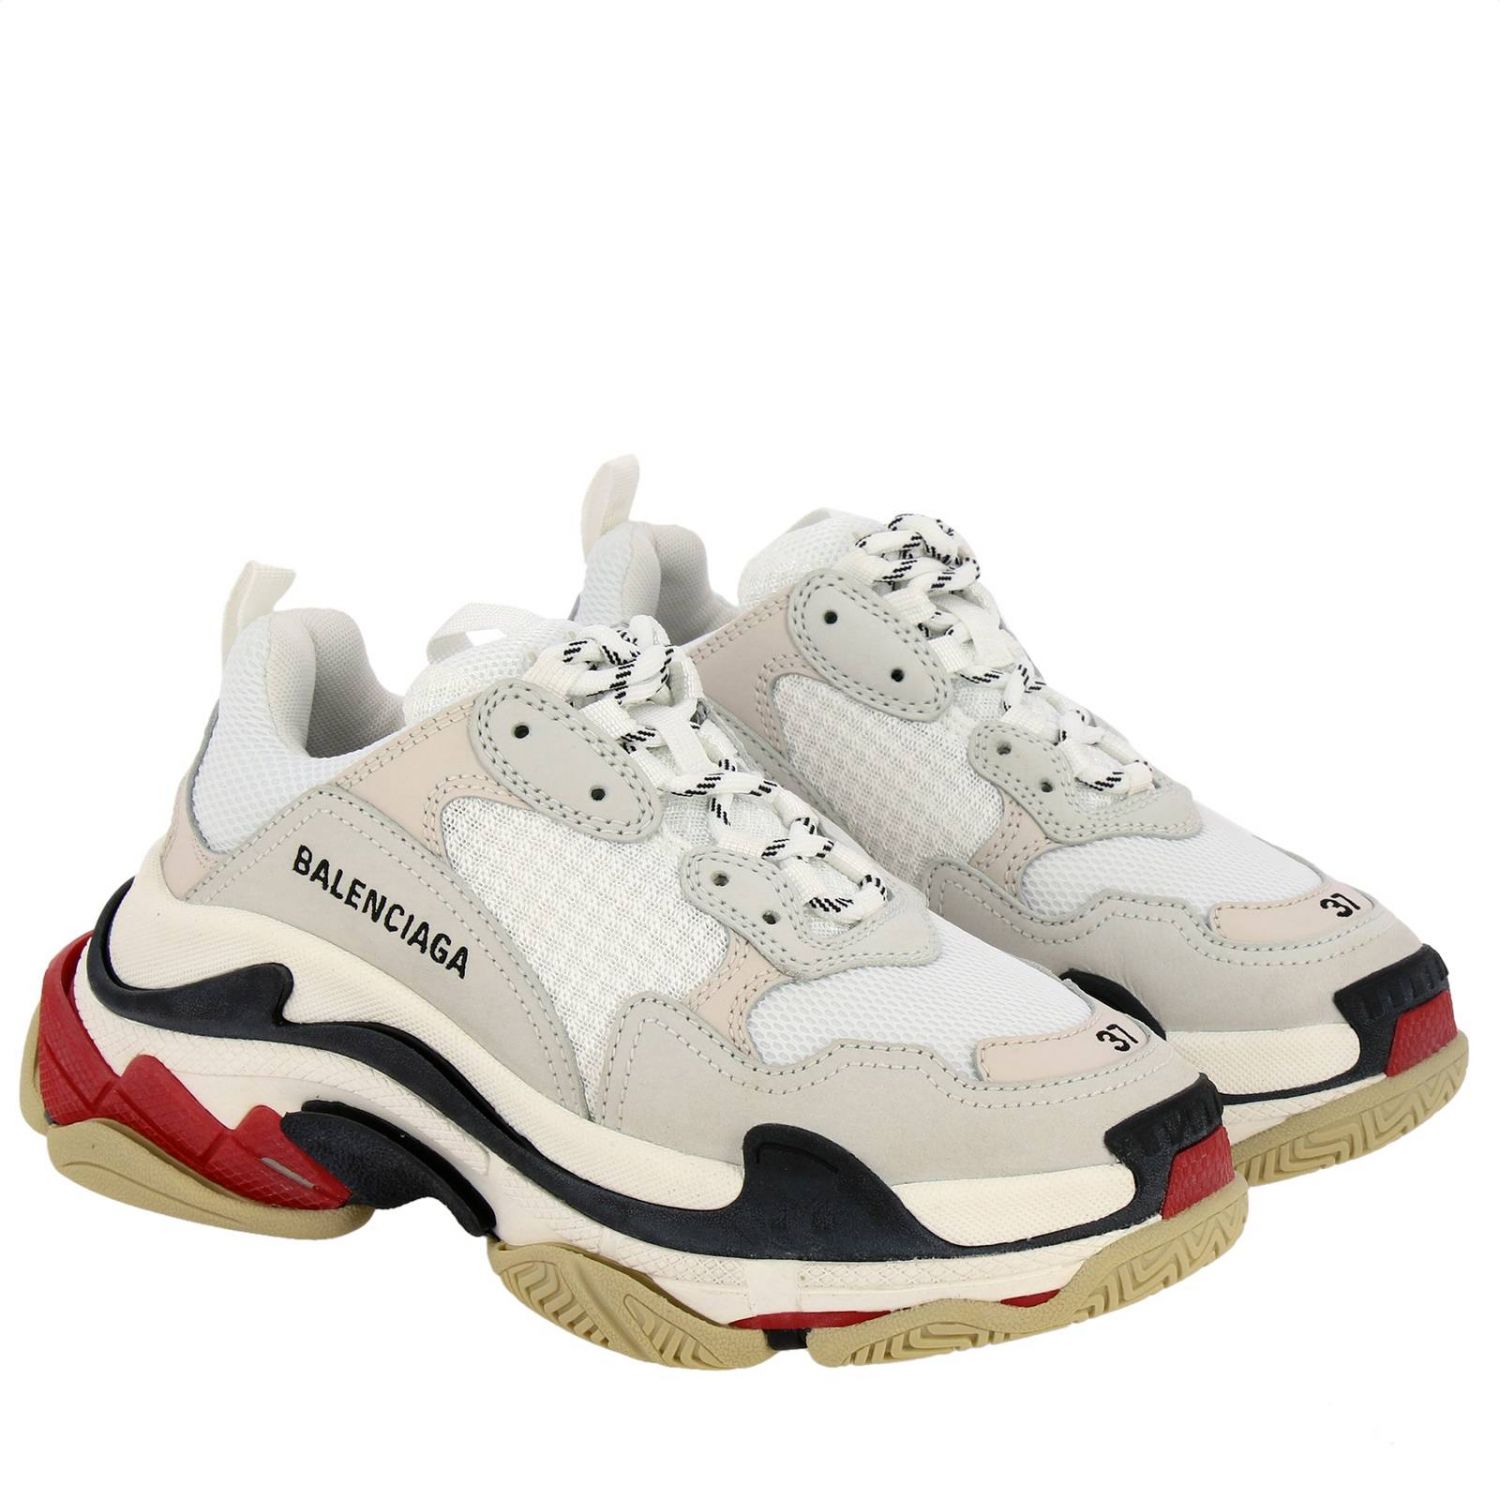 Balenciaga Triple S Running sneakers in leather and micro-mesh with